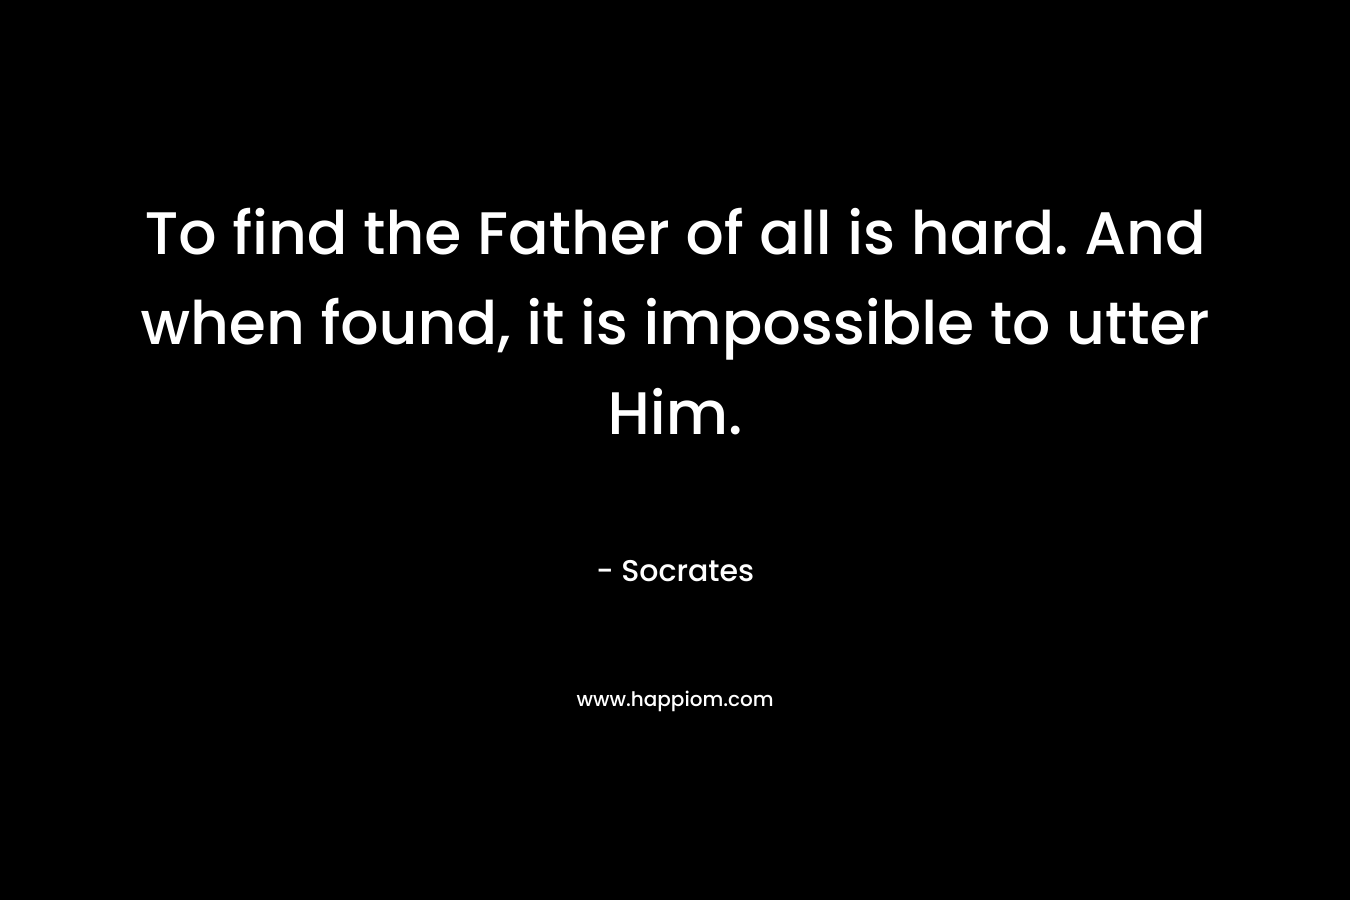 To find the Father of all is hard. And when found, it is impossible to utter Him. – Socrates